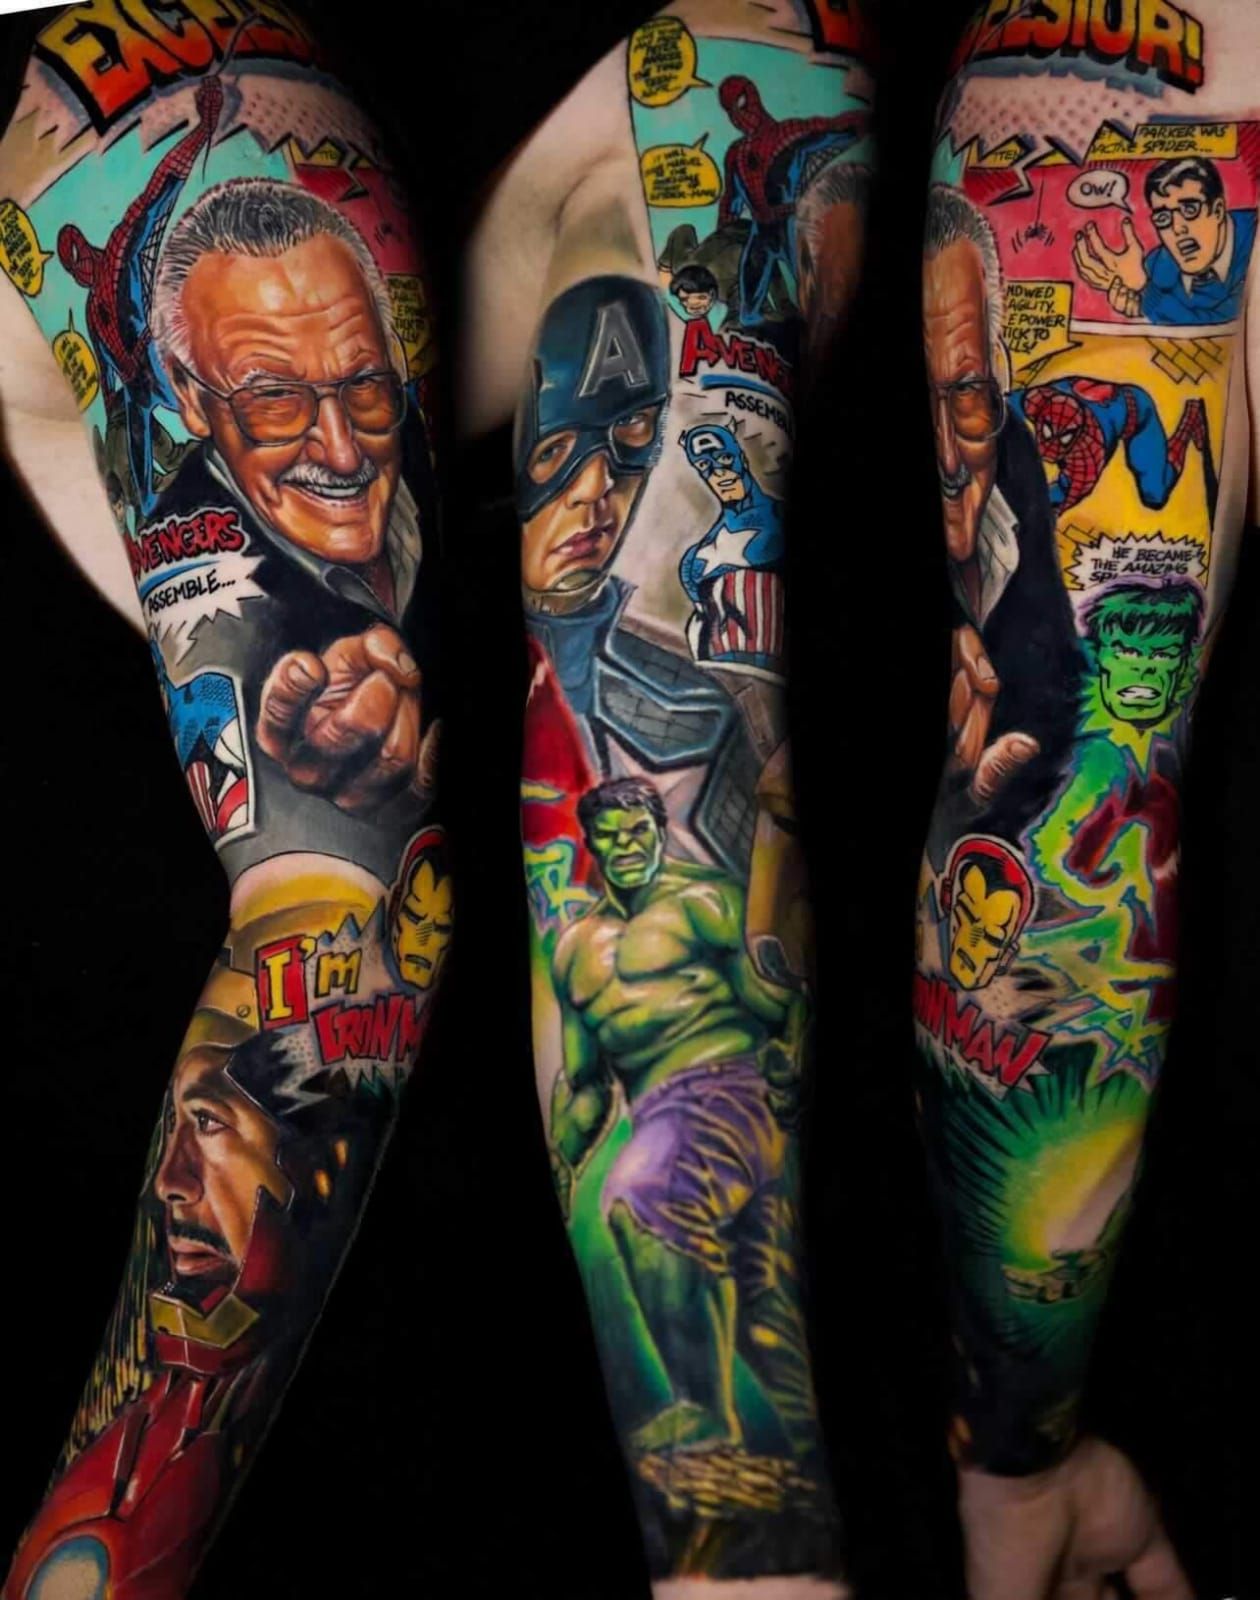 Ynot Ink Studio - Tony Evangelista finished this DC/Marvel leg sleeve. Give  💥Tony Evangelista💥 a follow on his Instagram or on Facebook 👉🏽  https://www.instagram.com/tonyevangelista/ 👉🏽  https://m.facebook.com/tony.evangelista.ynotink?ref=bookmarks ...